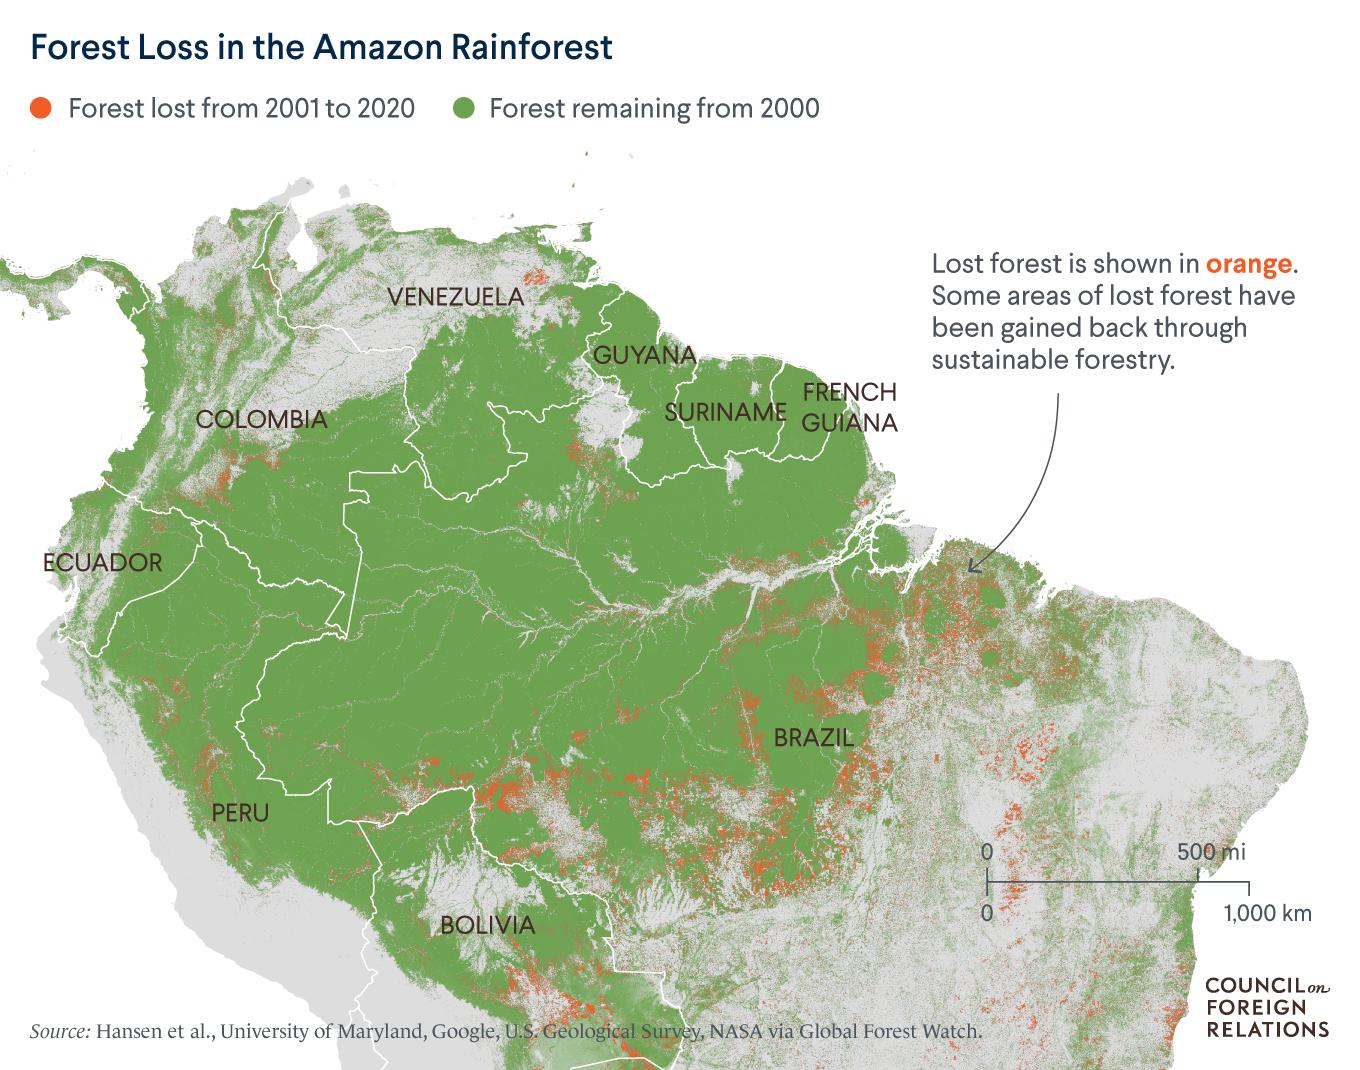 Size matters? How big is Brazil - The Brazilian Report